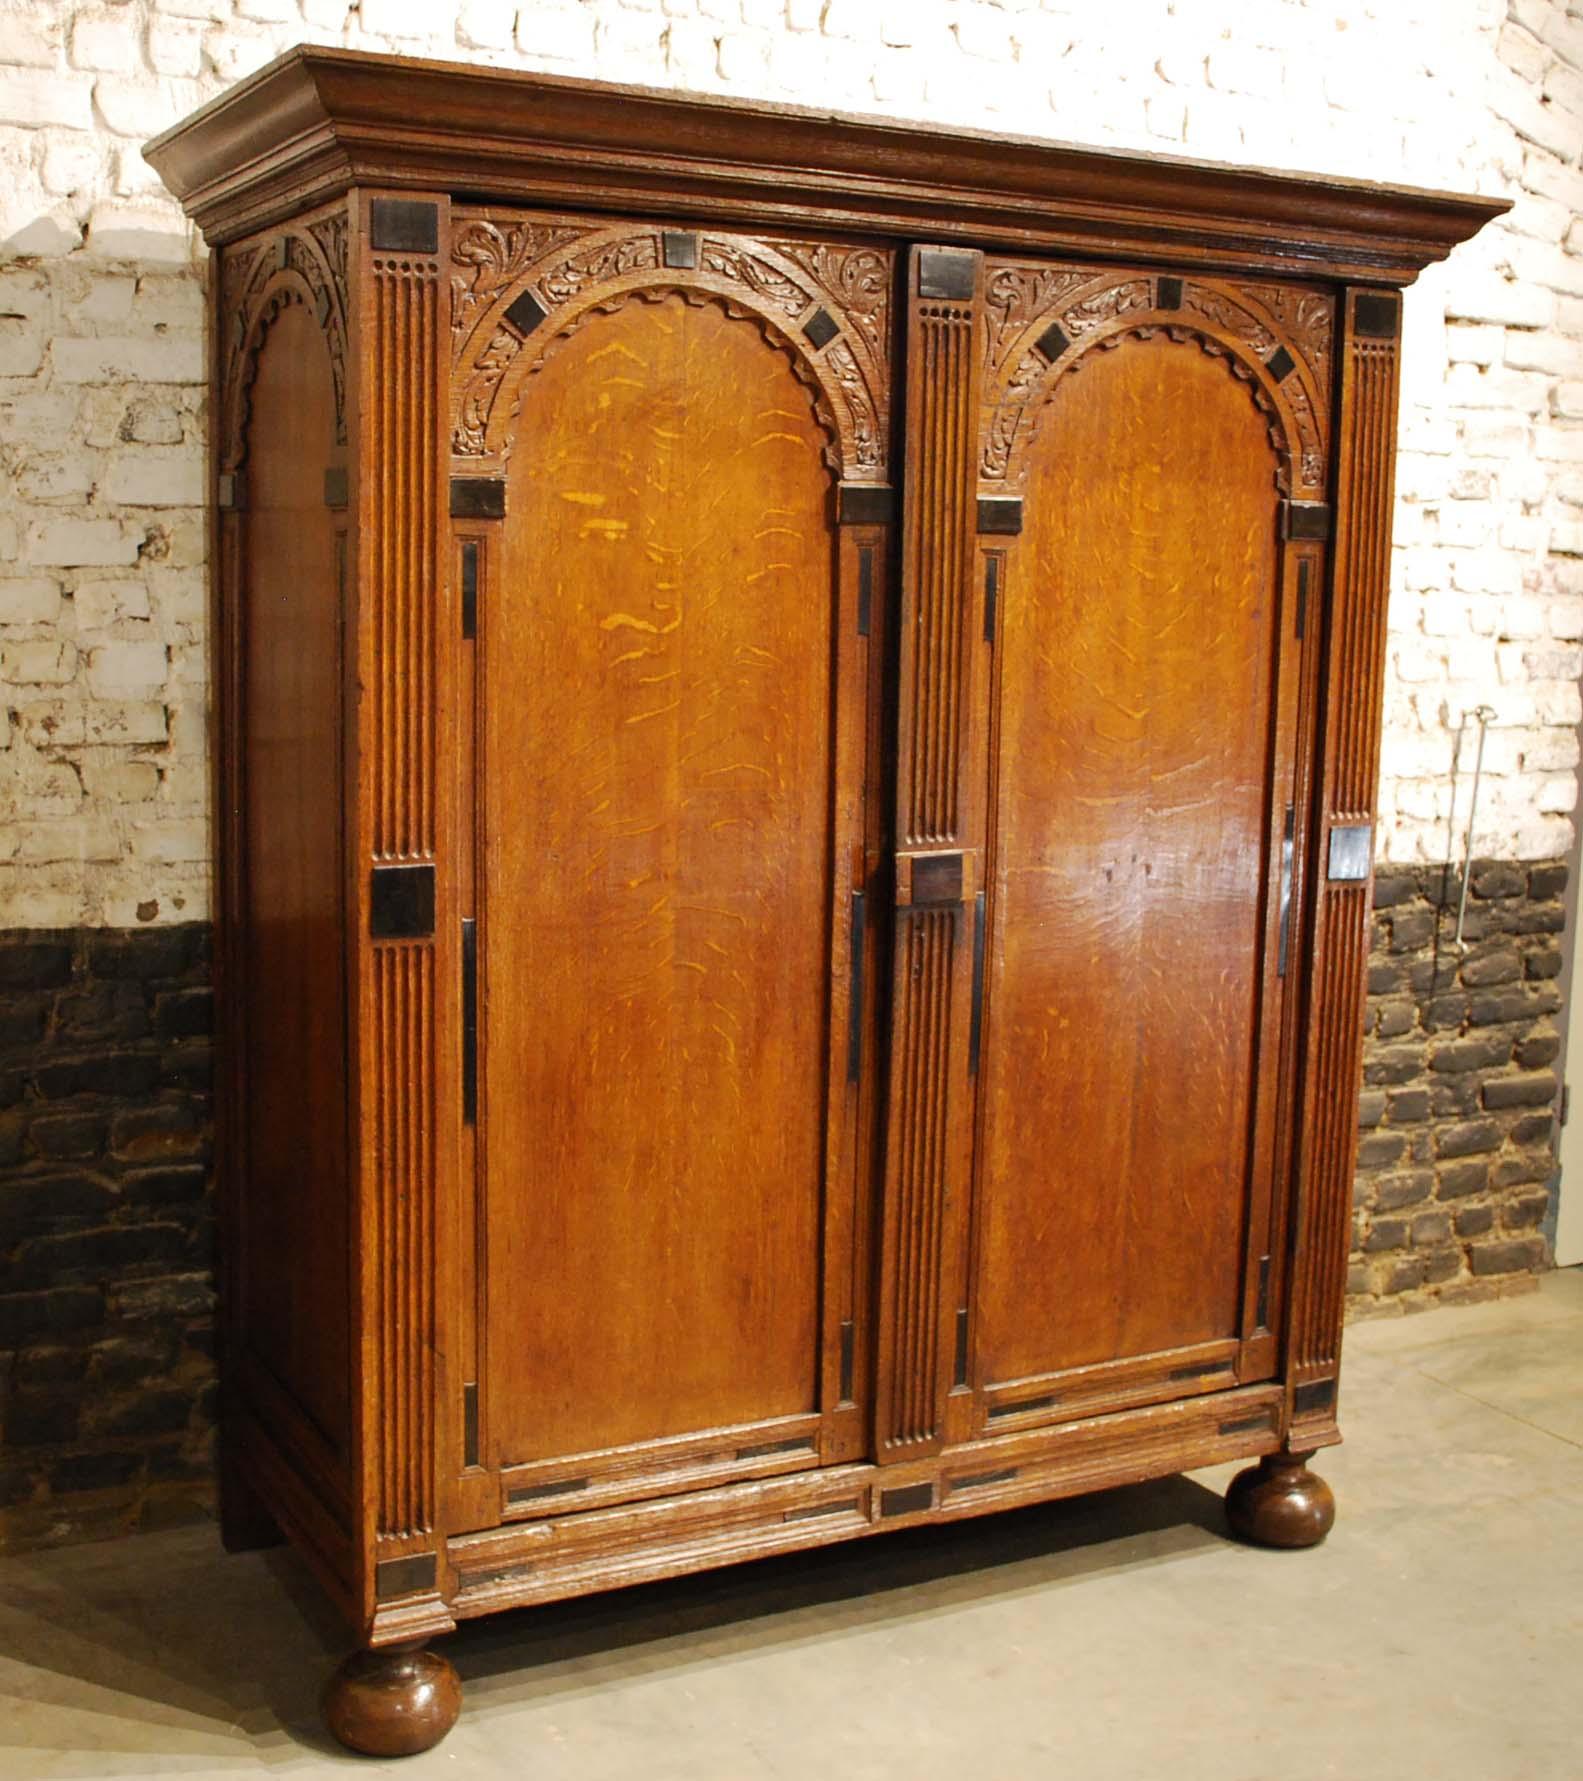 This extraordinary cupboard is made of the finest quarter sawn oak in the tradition of the Dutch Renaissance during the “Dutch golden age” 
It is a small two-door cabinet with arched doors and sides. This cabinet is made in the Provence of Utrecht